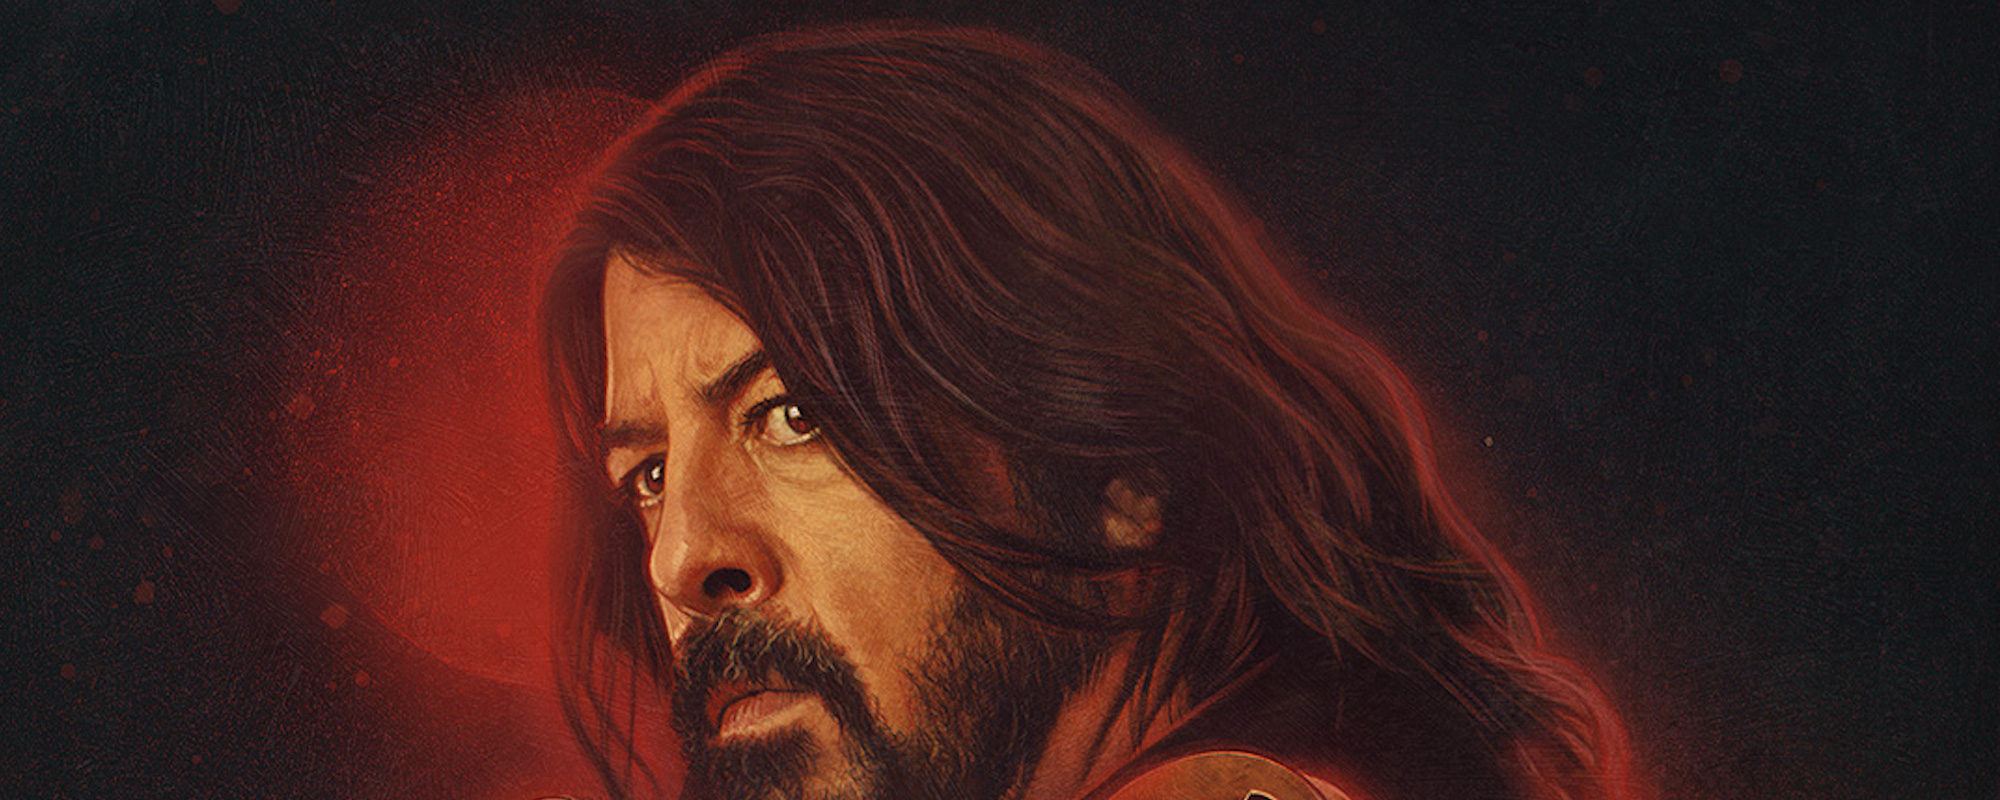 Foo Fighters Release Highly-Anticipated New Comedy-Horror Film ‘Studio 666’; Dave Grohl Talks Getting Electrocuted